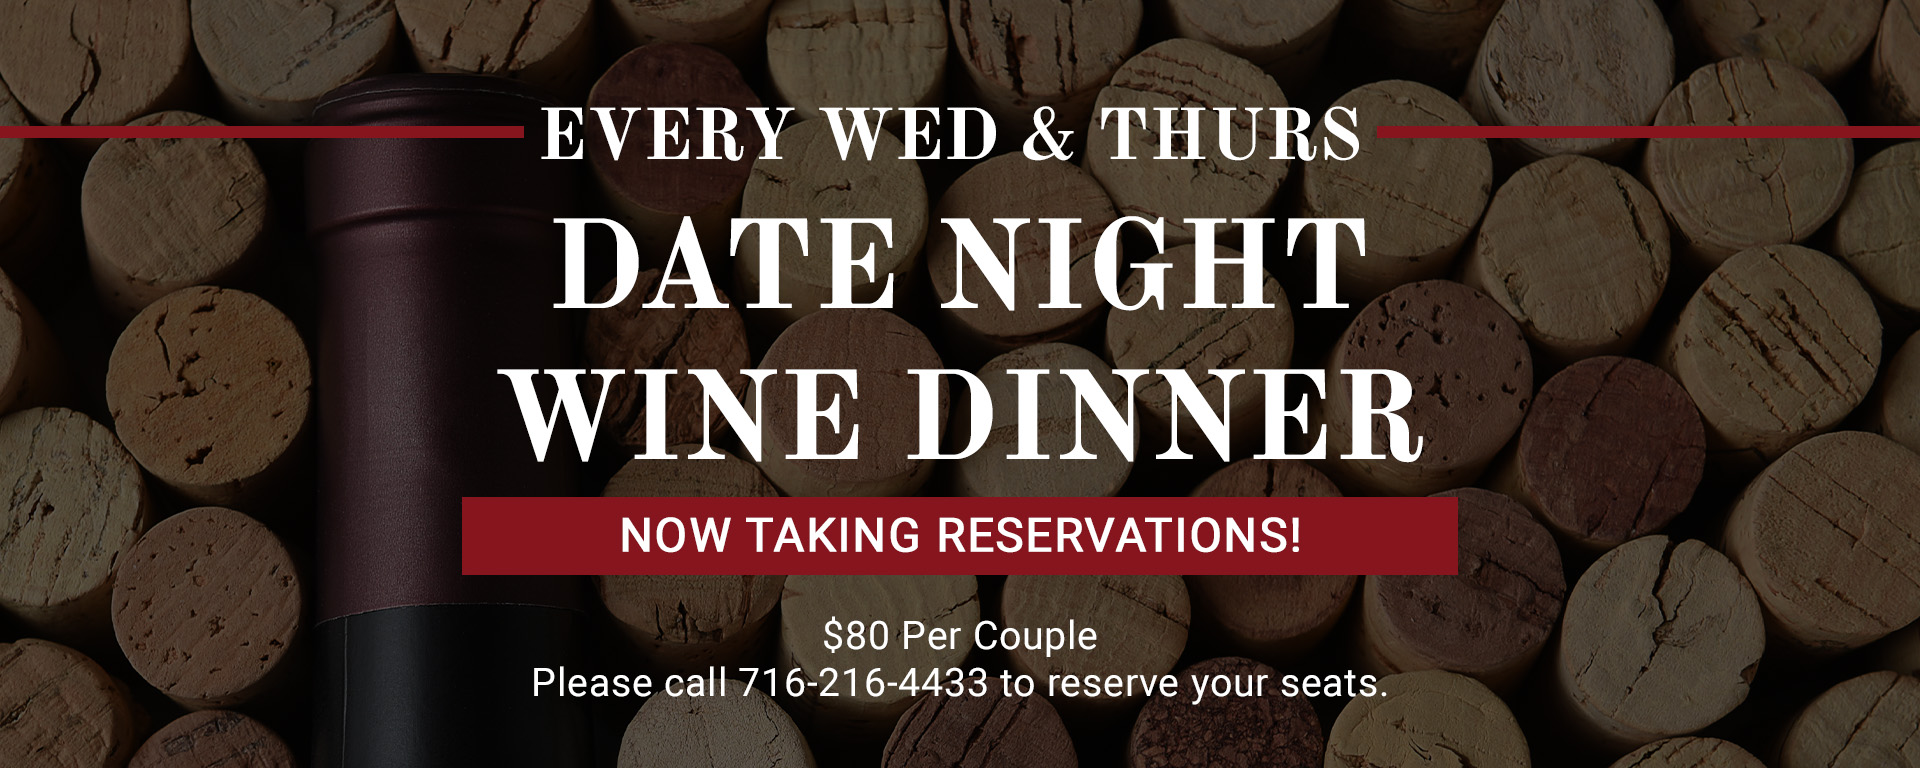 Date Night Wine Dinner - Every Wed & Thurs